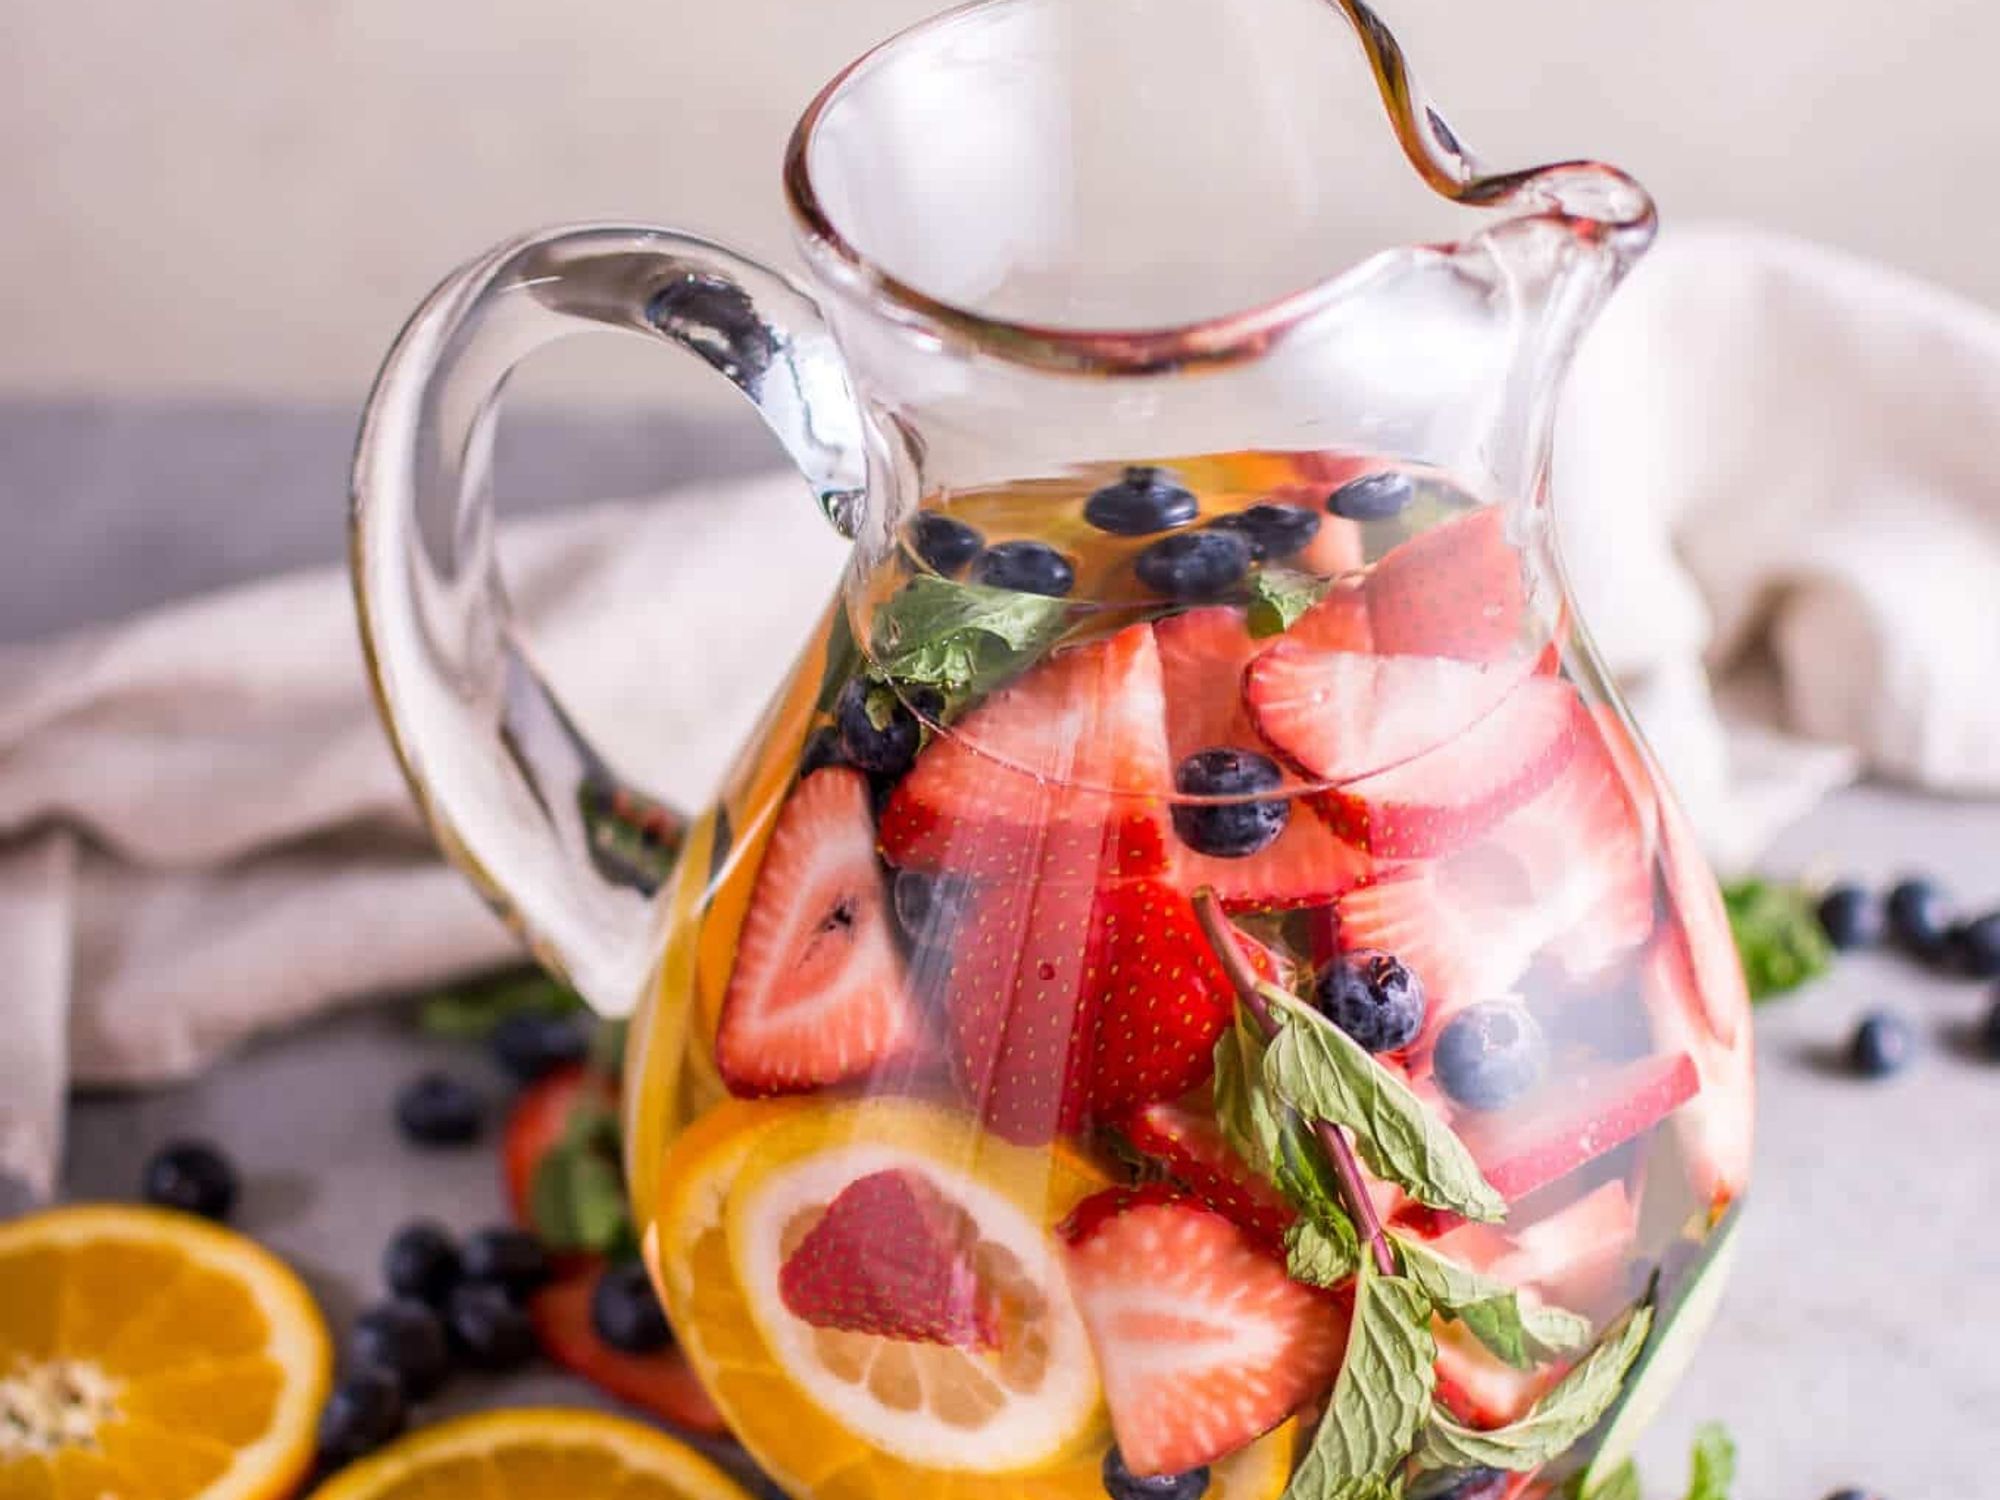 https://www.brit.co/media-library/refreshing-infused-and-flavored-waters.jpg?id=33114296&width=2000&height=1500&coordinates=0%2C510%2C0%2C510